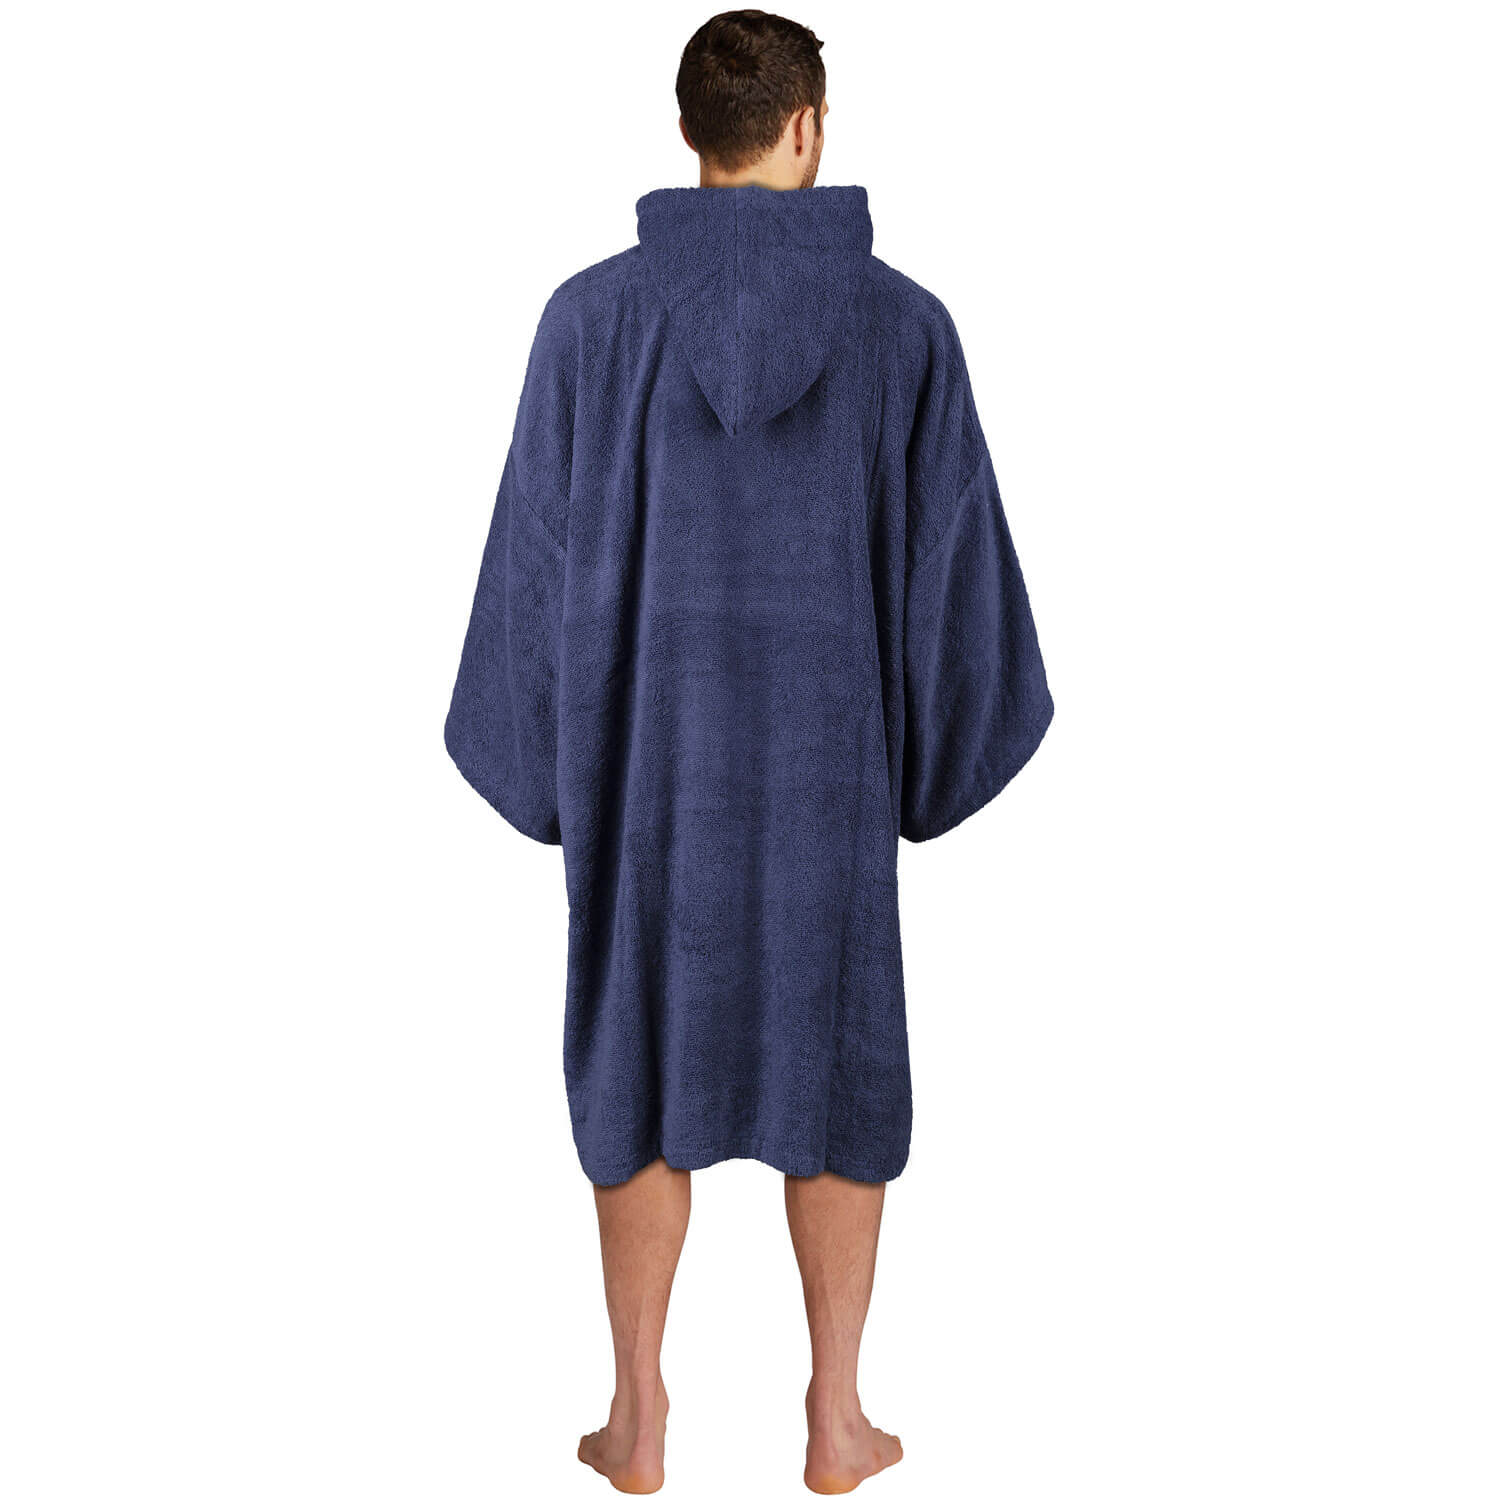 The Home Collection Adult Long Sleeve Poncho - Large - Navy 2 Shaws Department Stores